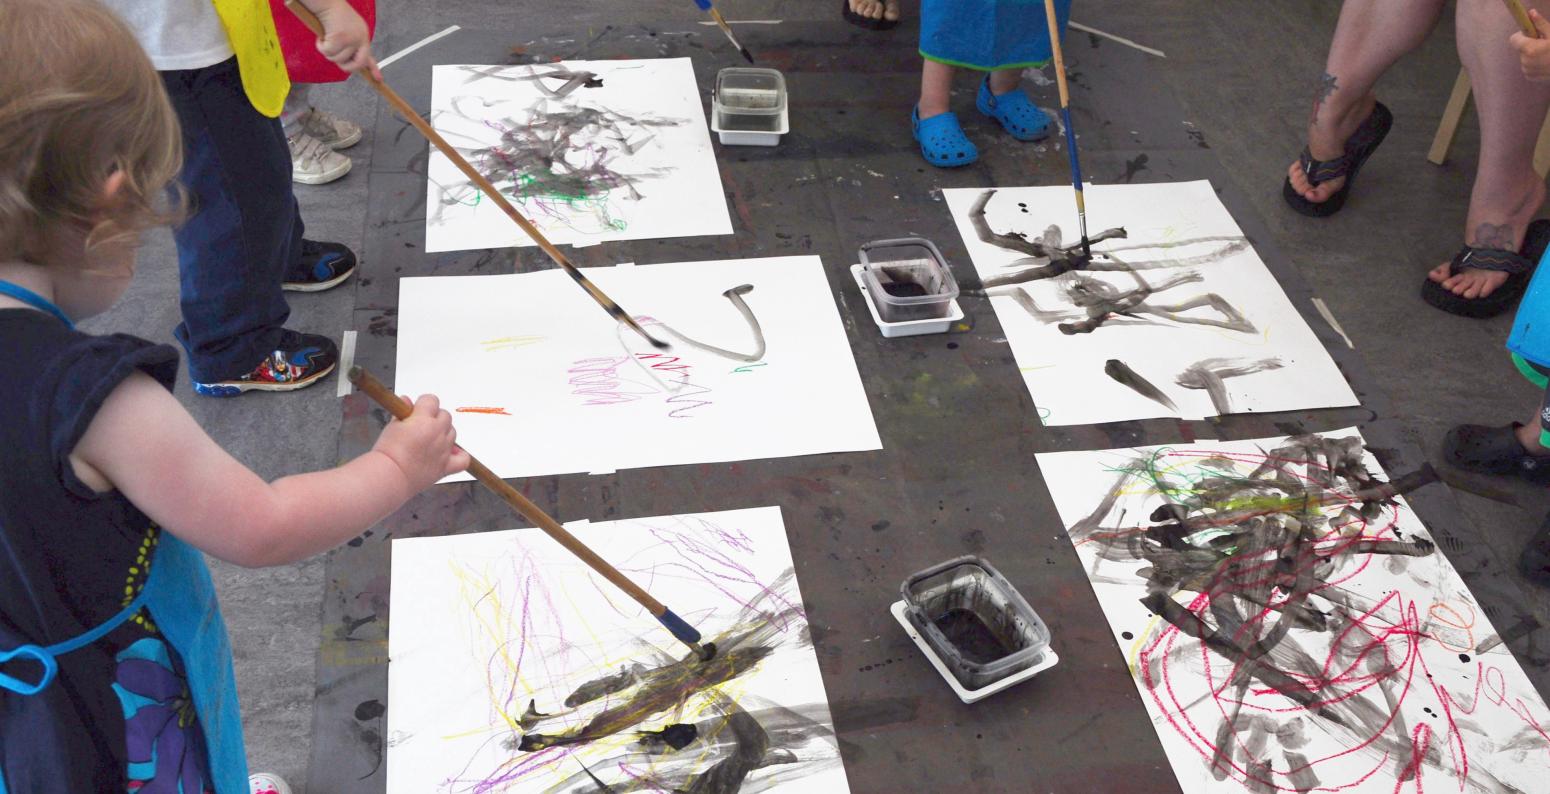 Young children standing and painting with black paint on the floor using long brushes.